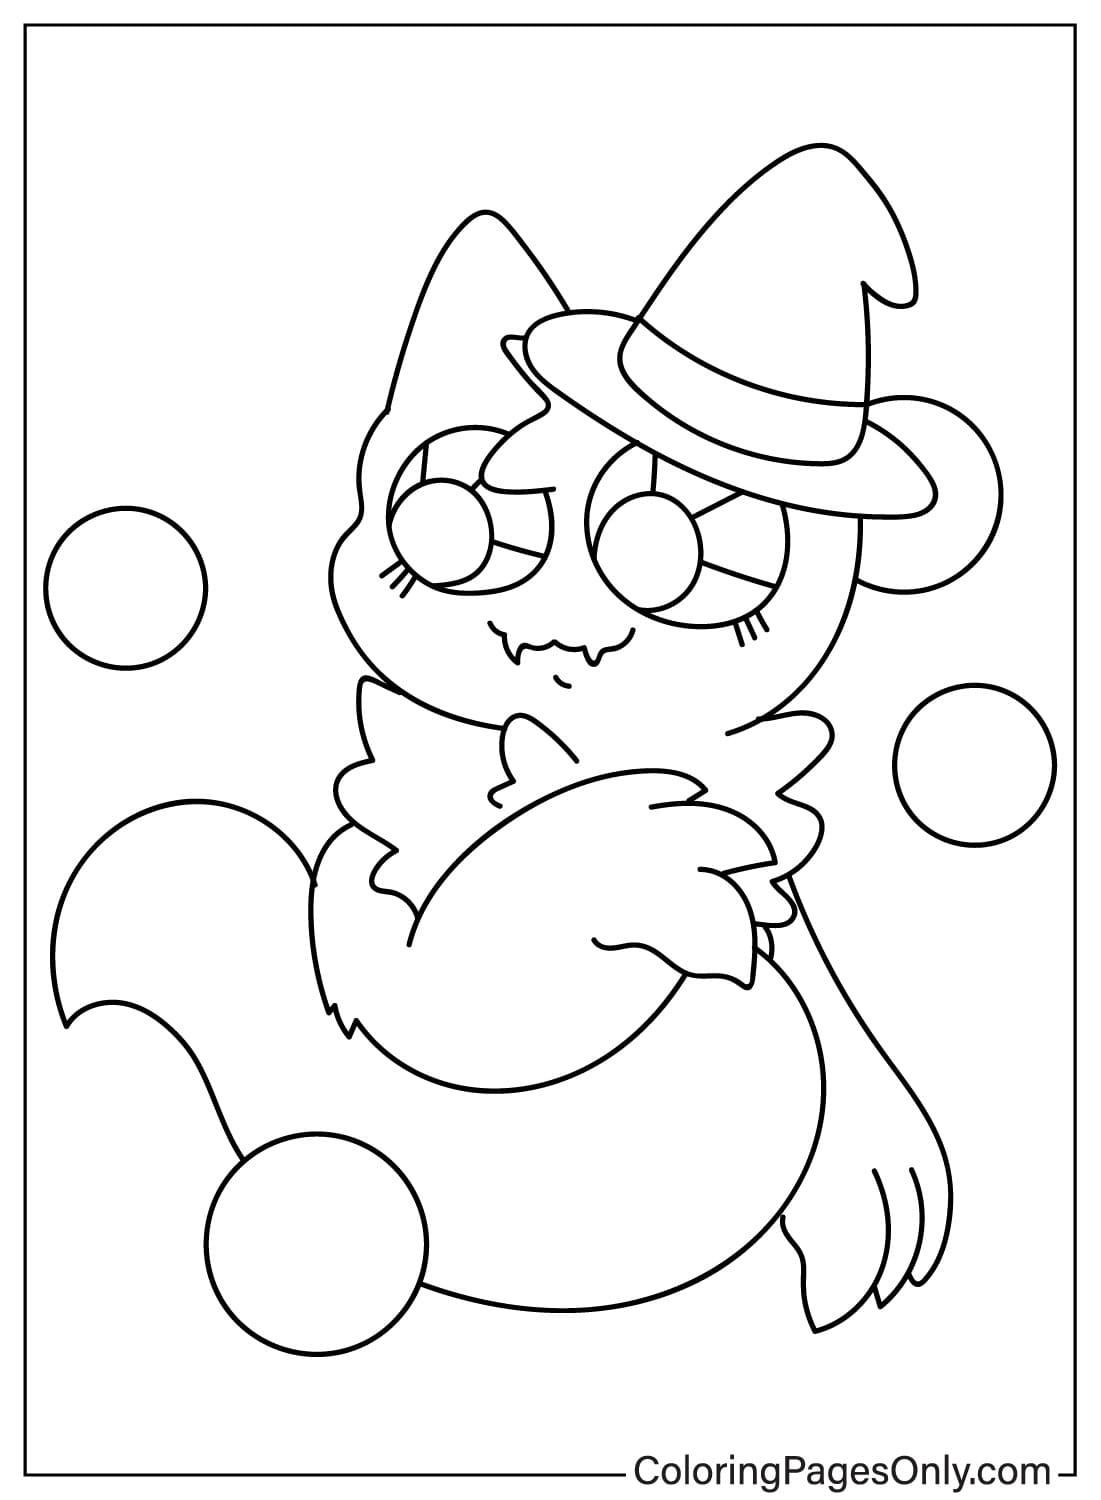 Ghazt Coloring Pages to Download from Ghazt